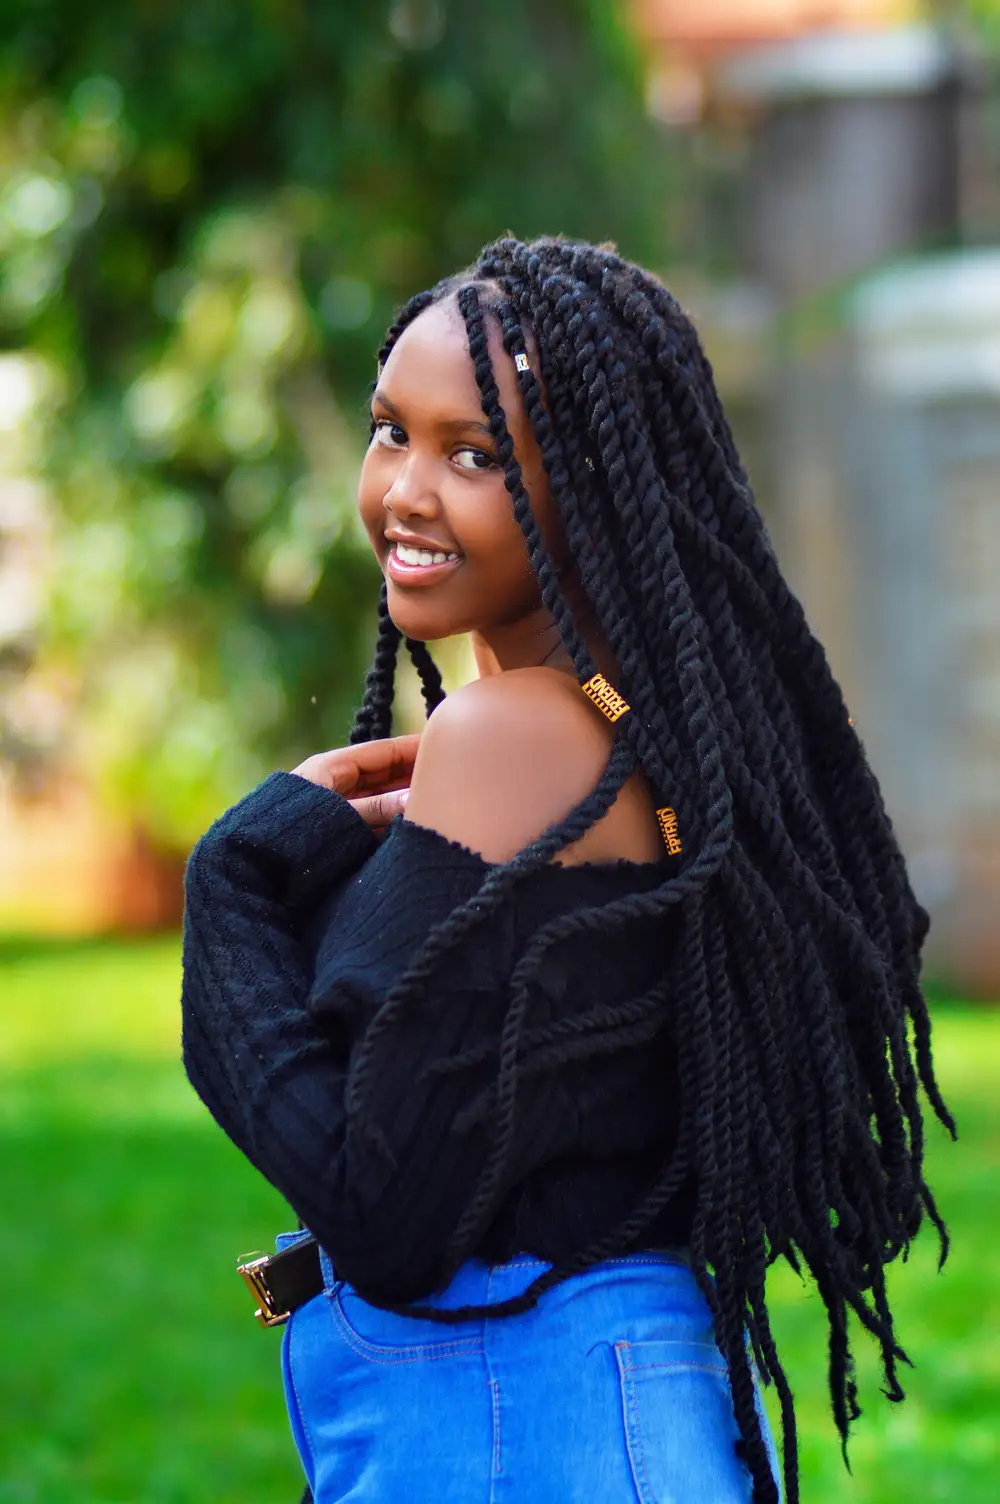 Woman smiling with braids